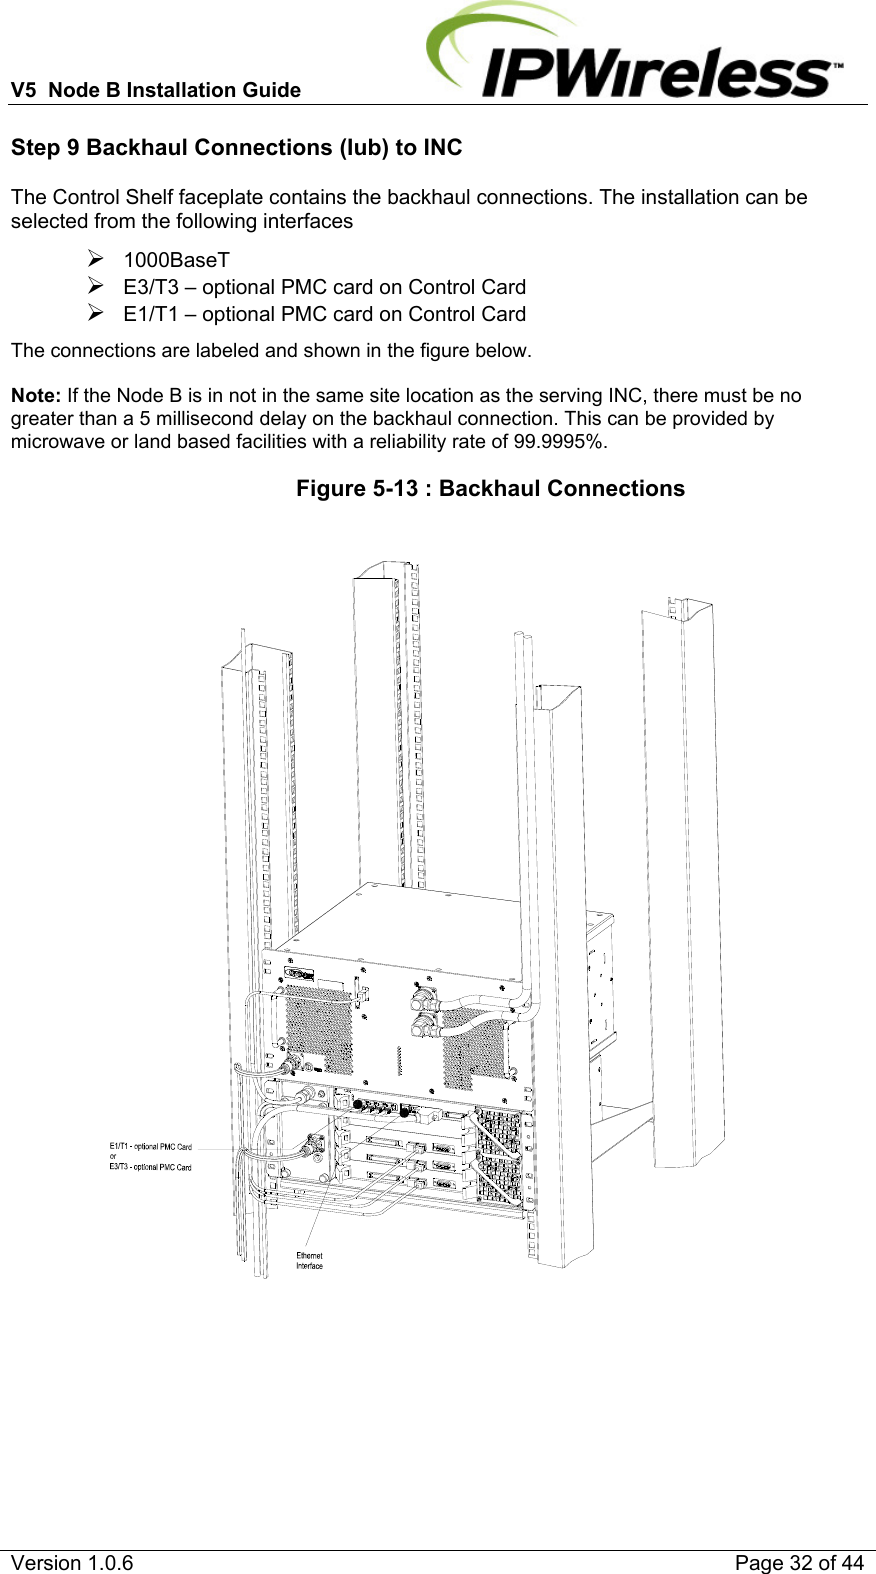 V5  Node B Installation Guide                           Version 1.0.6    Page 32 of 44 Step 9 Backhaul Connections (Iub) to INC The Control Shelf faceplate contains the backhaul connections. The installation can be selected from the following interfaces ¾ 1000BaseT  ¾ E3/T3 – optional PMC card on Control Card ¾ E1/T1 – optional PMC card on Control Card The connections are labeled and shown in the figure below.   Note: If the Node B is in not in the same site location as the serving INC, there must be no greater than a 5 millisecond delay on the backhaul connection. This can be provided by microwave or land based facilities with a reliability rate of 99.9995%.                   Figure 5-13 : Backhaul Connections     